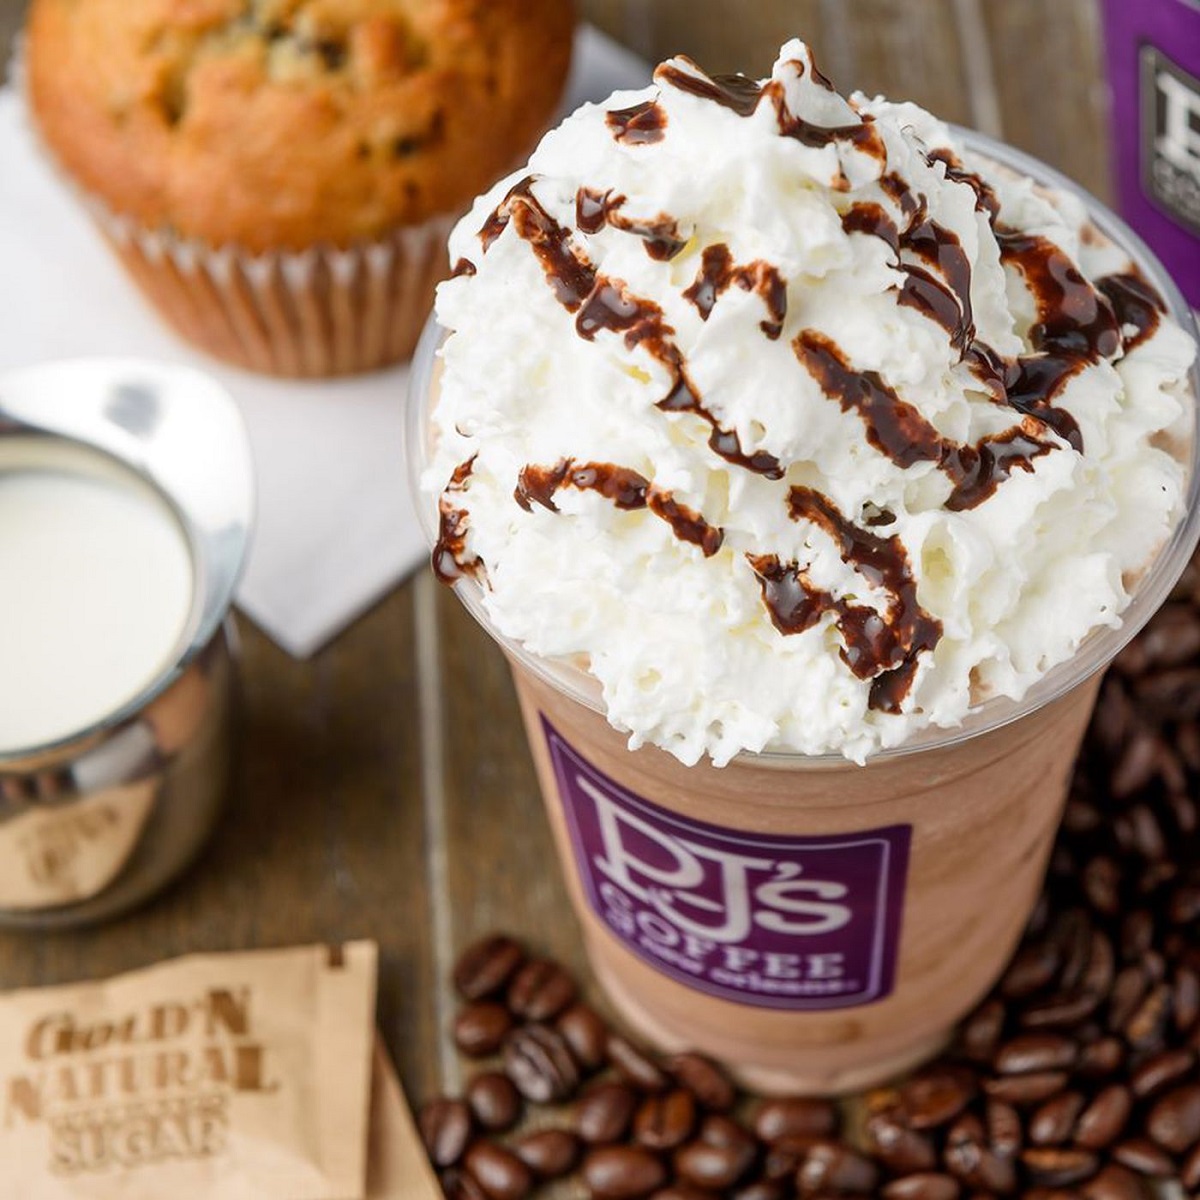 A close up of a PJ's iced specialty drink with whipped cream, a muffin, some coffee beans and a small pitcher of creamer.